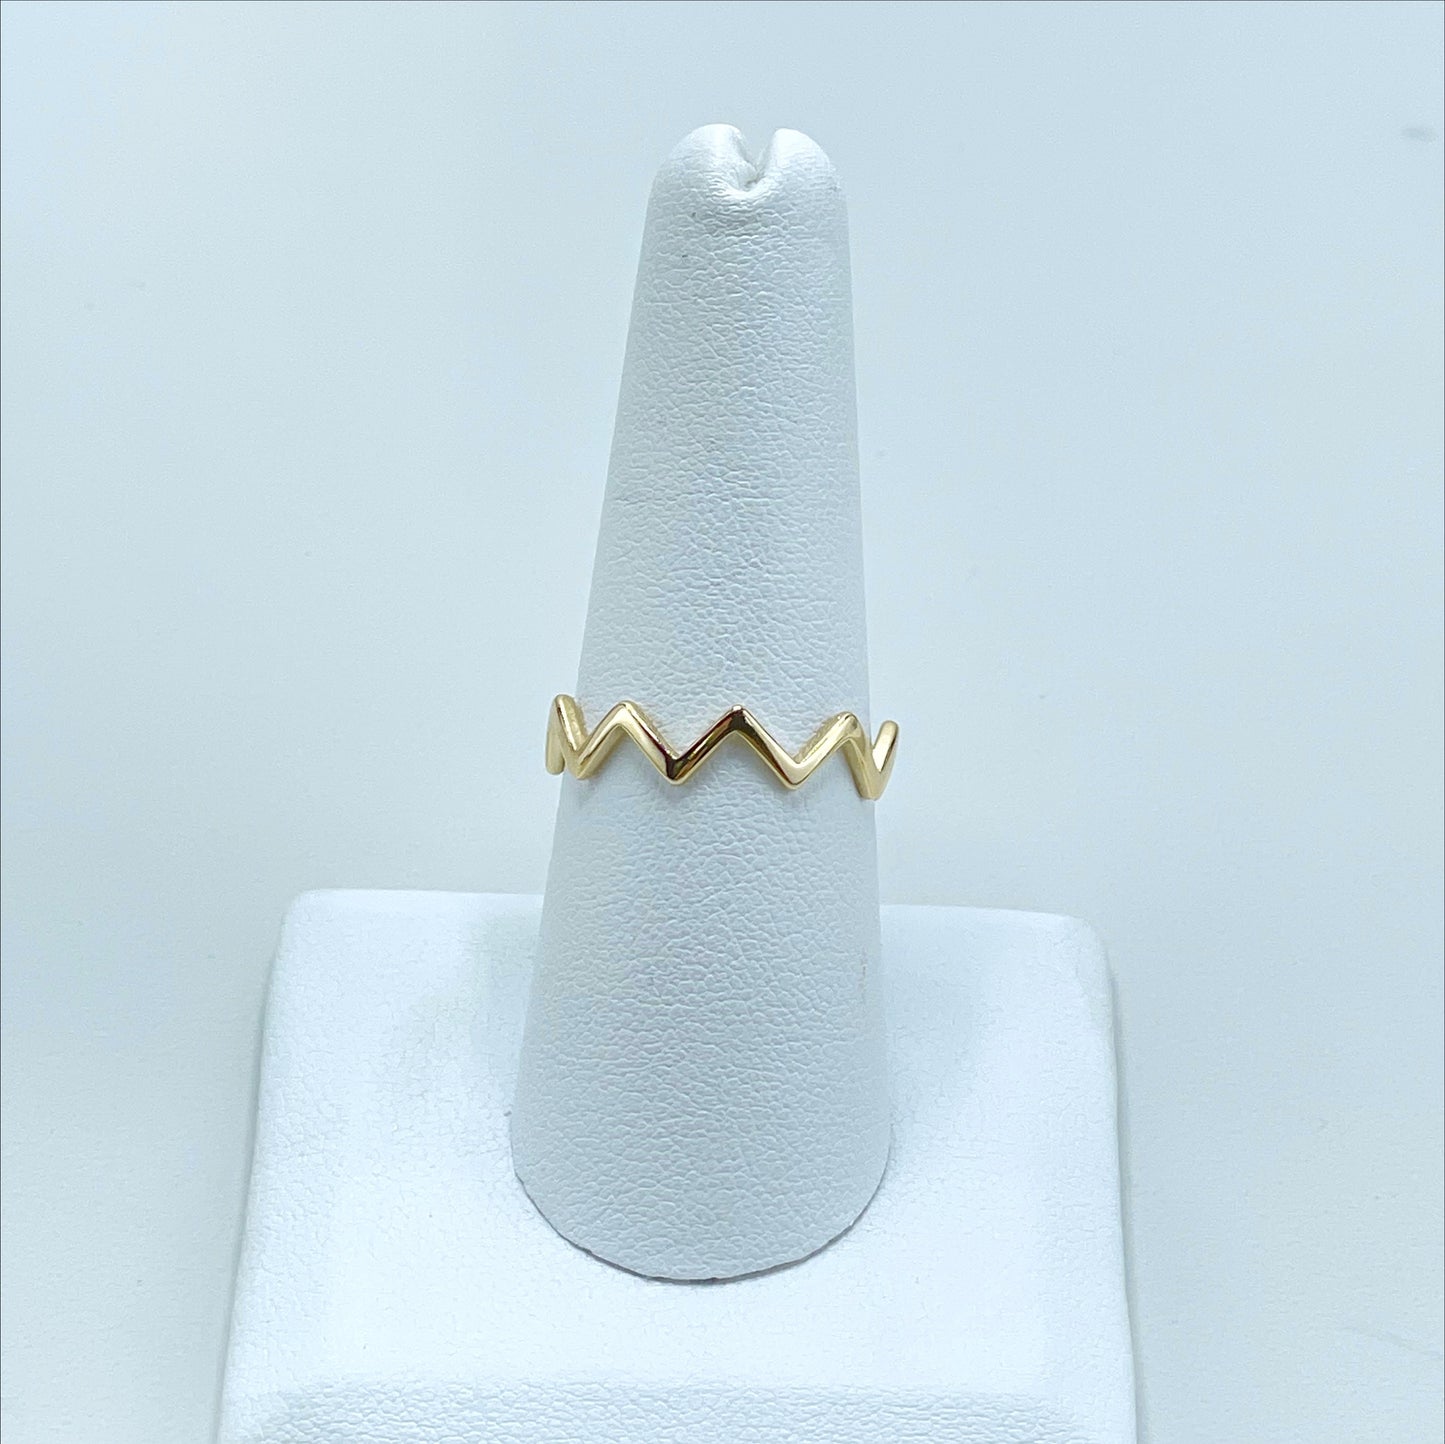 18k Gold Filled Delicate Wave Ring Wholesale Jewelry Supplies